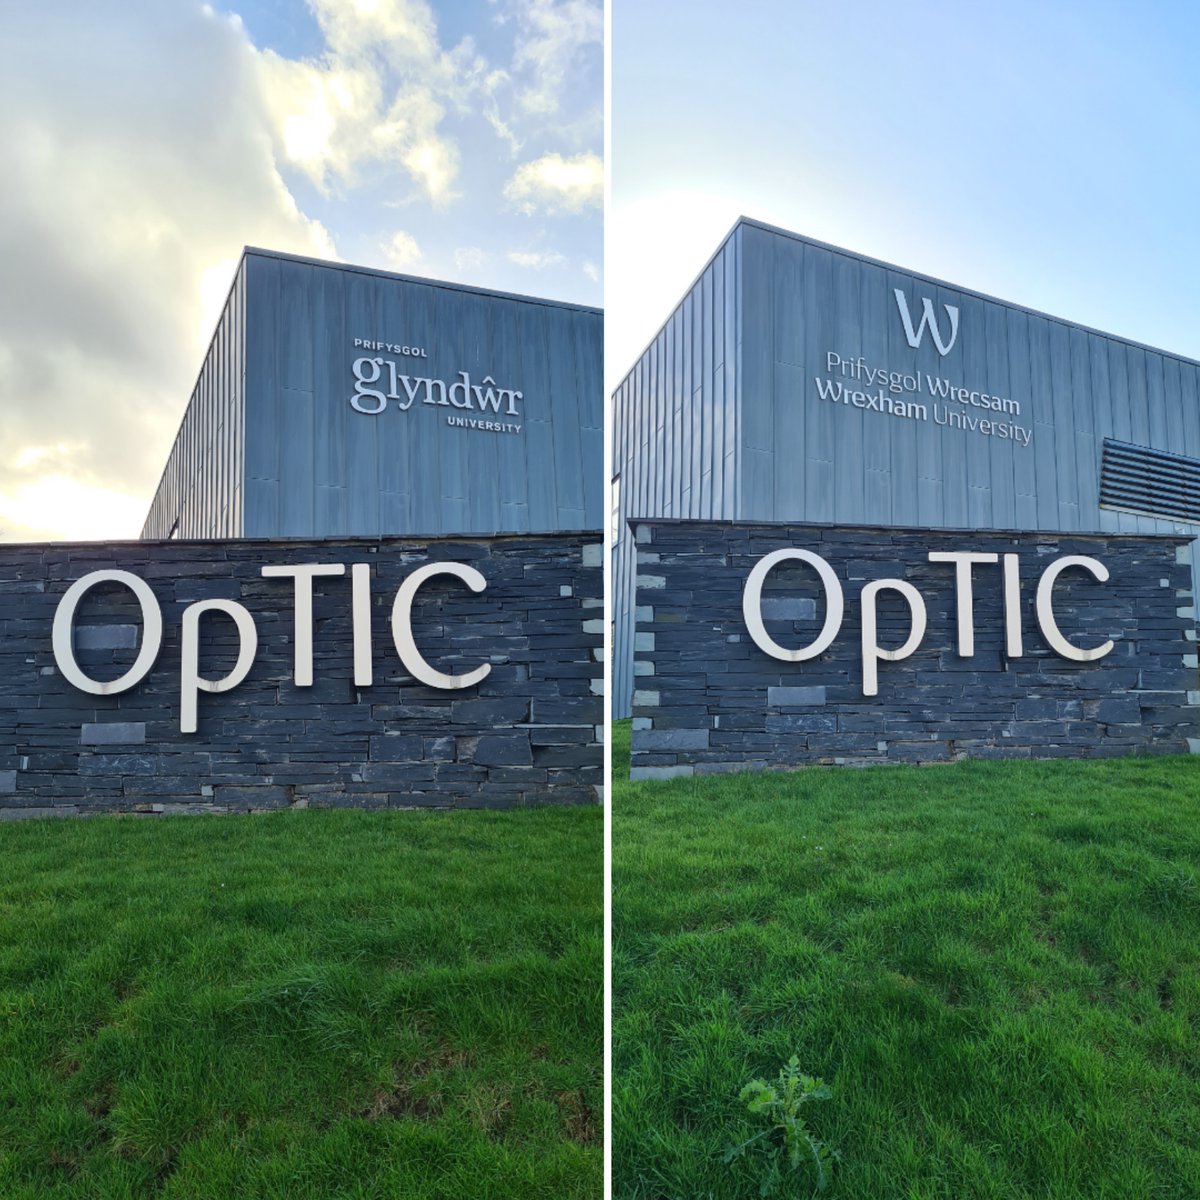 Following @WrexhamUni's recent rebrand, we were excited to see new external signage installed at OpTIC this week. 

We think you'll agree that it's looking fantastic! 😍 ✨

#signage #rebrand #update #campus #university #centre #Wrexham #Wrecsam #StAsaph #Llanelwy #Wales #Cymru